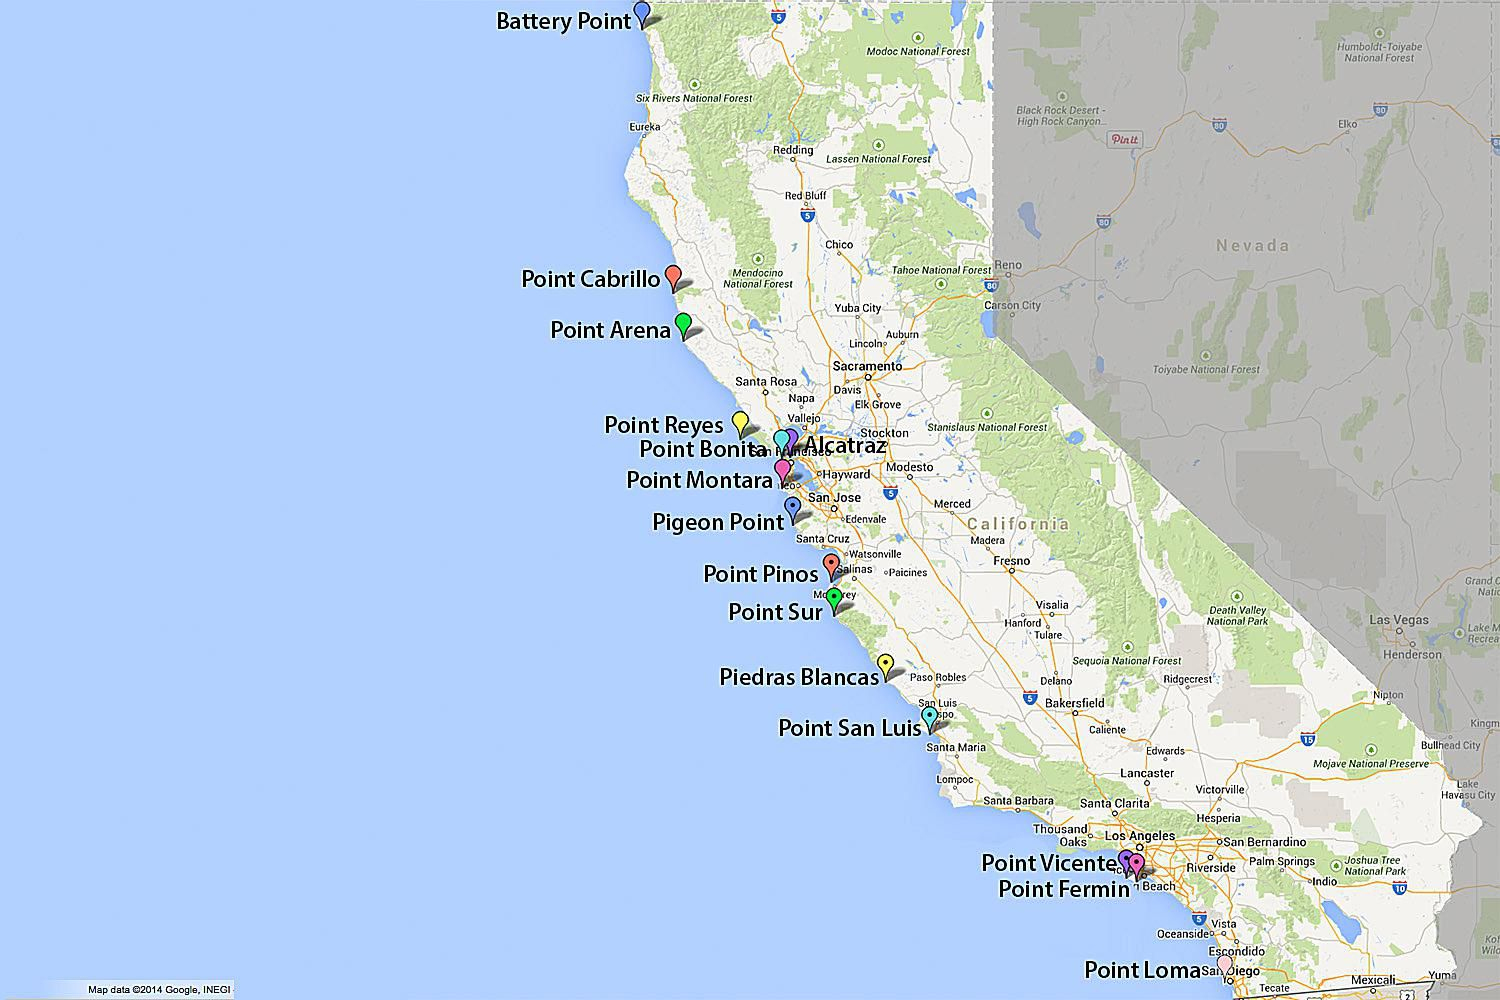 Maps Of California - Created For Visitors And Travelers - California Pictures Map